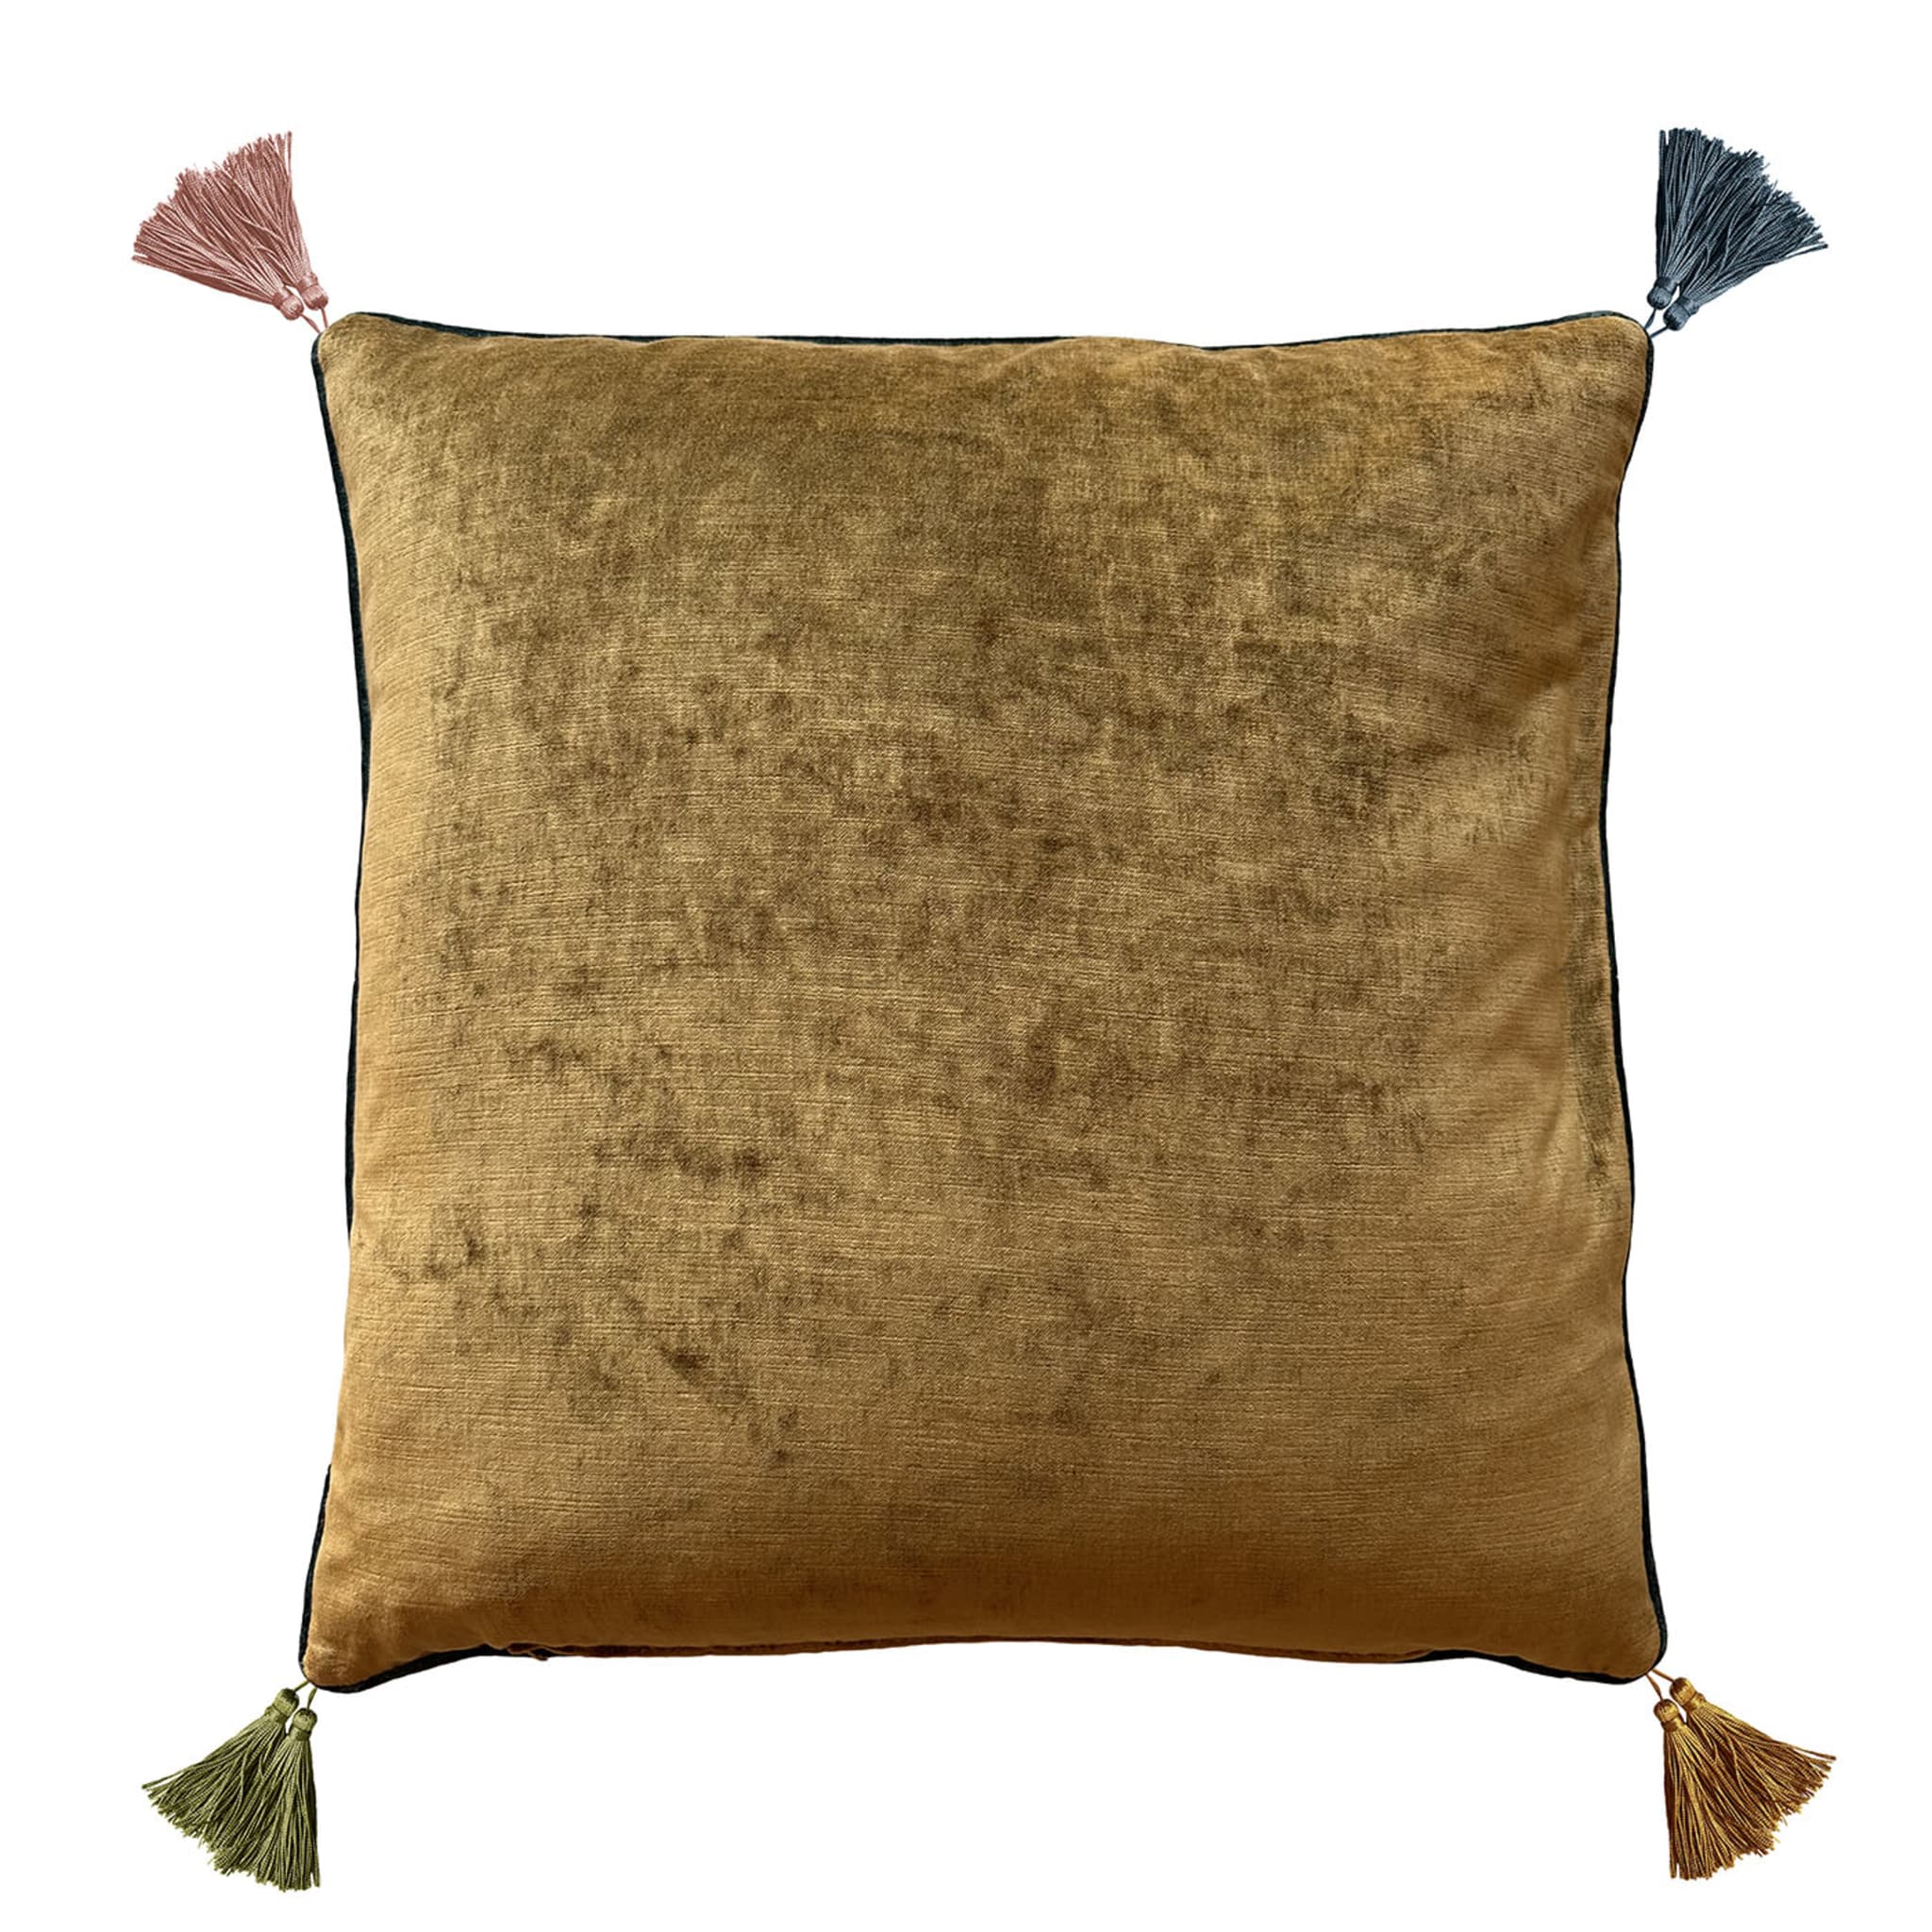 Circus Tigre Embroidered Beige Cushion - Alternative view 1